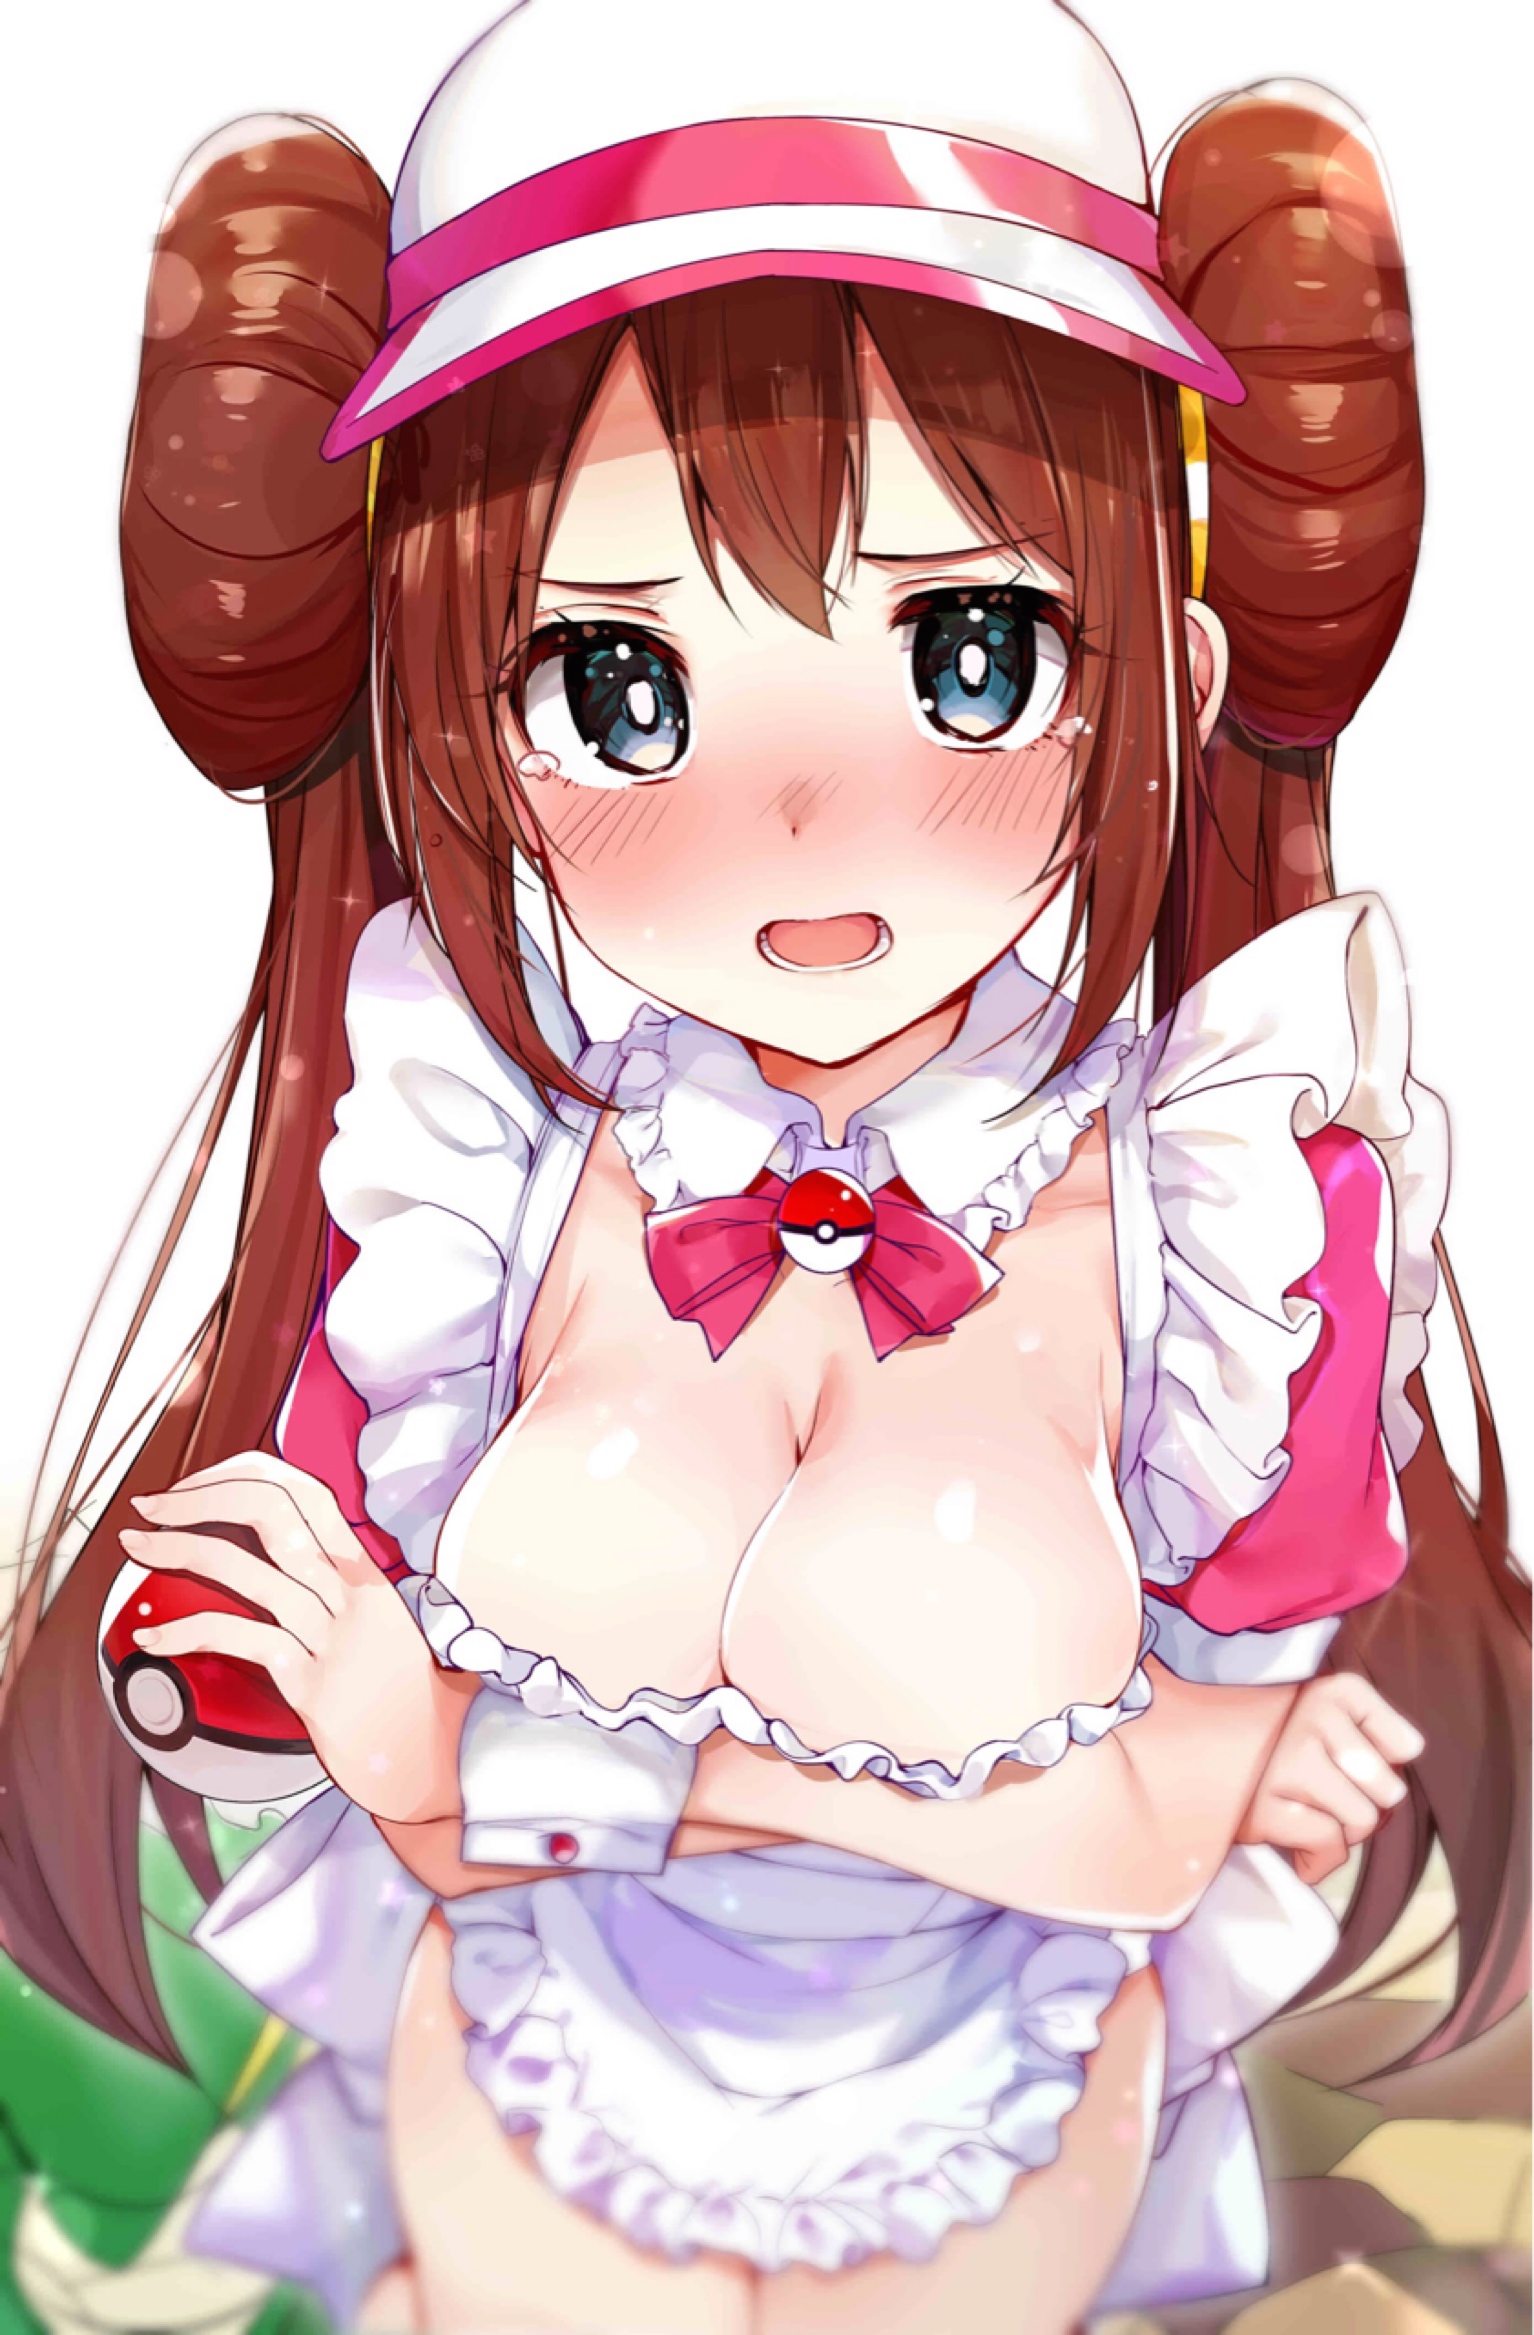 Anime 1534x2335 anime anime girls digital art artwork 2D portrait display Pokémon Rosa (Pokémon) brunette twintails blushing tears embarrassed cleavage holding boobs big boobs Rouka partially clothed apron naked apron undressing